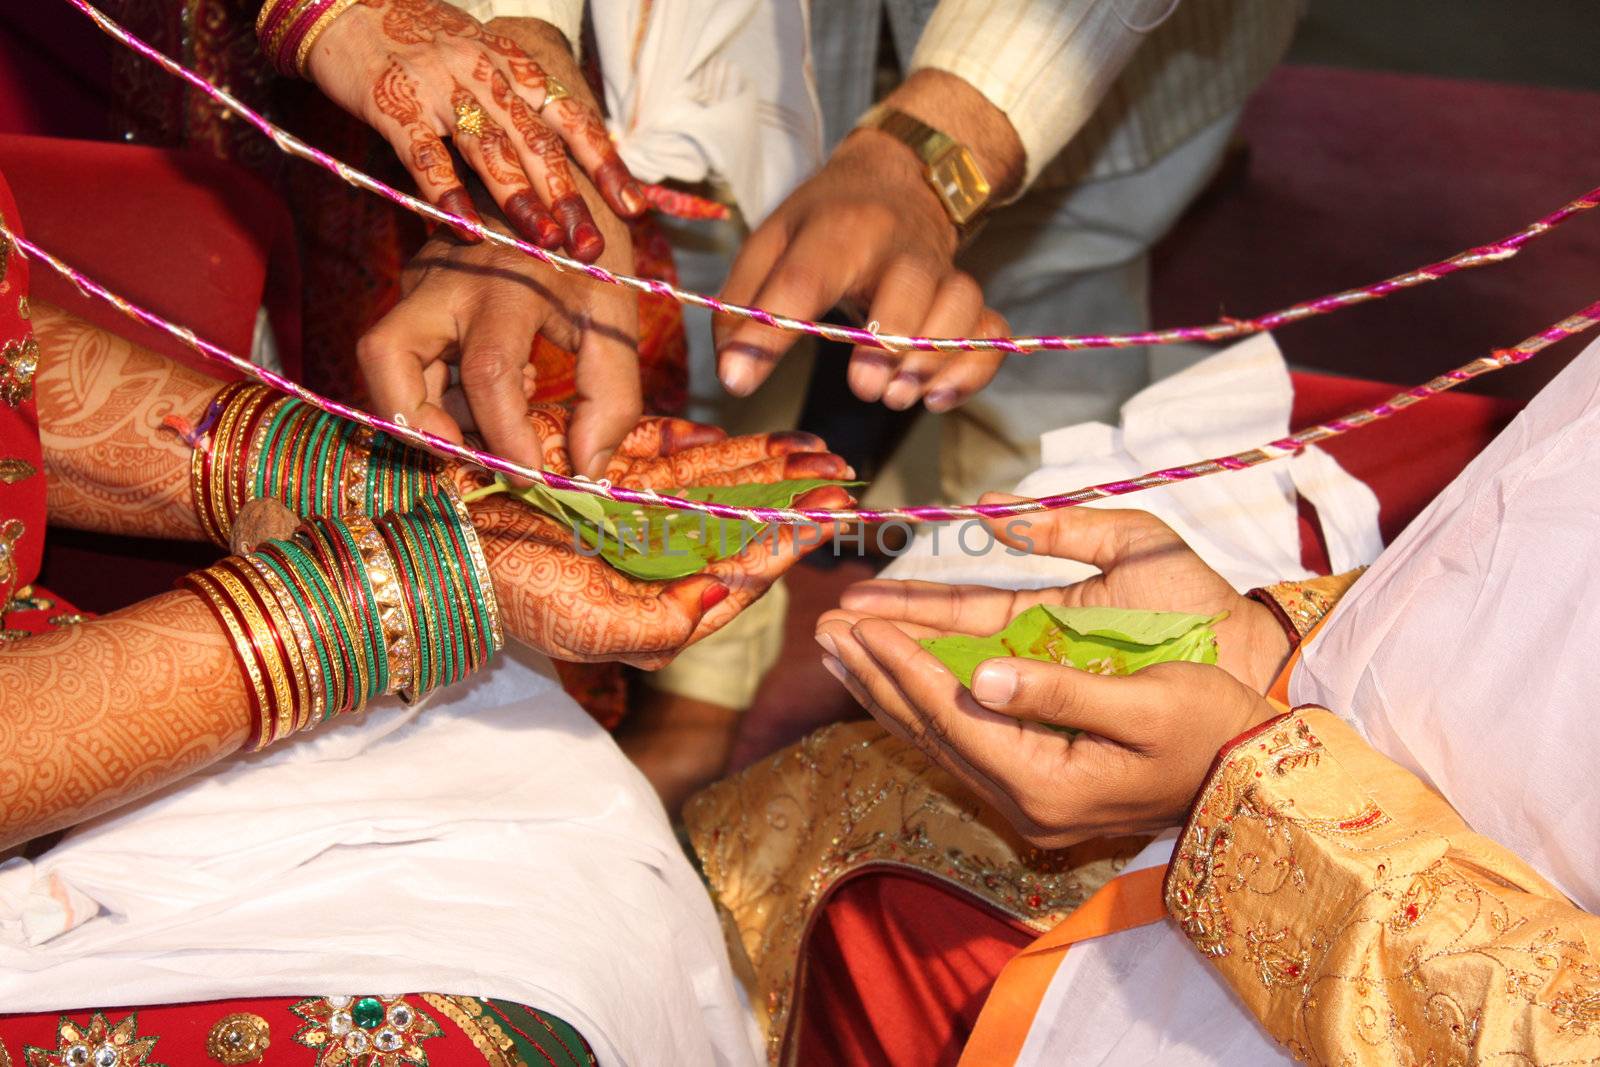 The hands of the groom and the bride performing an ancient ritual in a traditional hindu wedding.